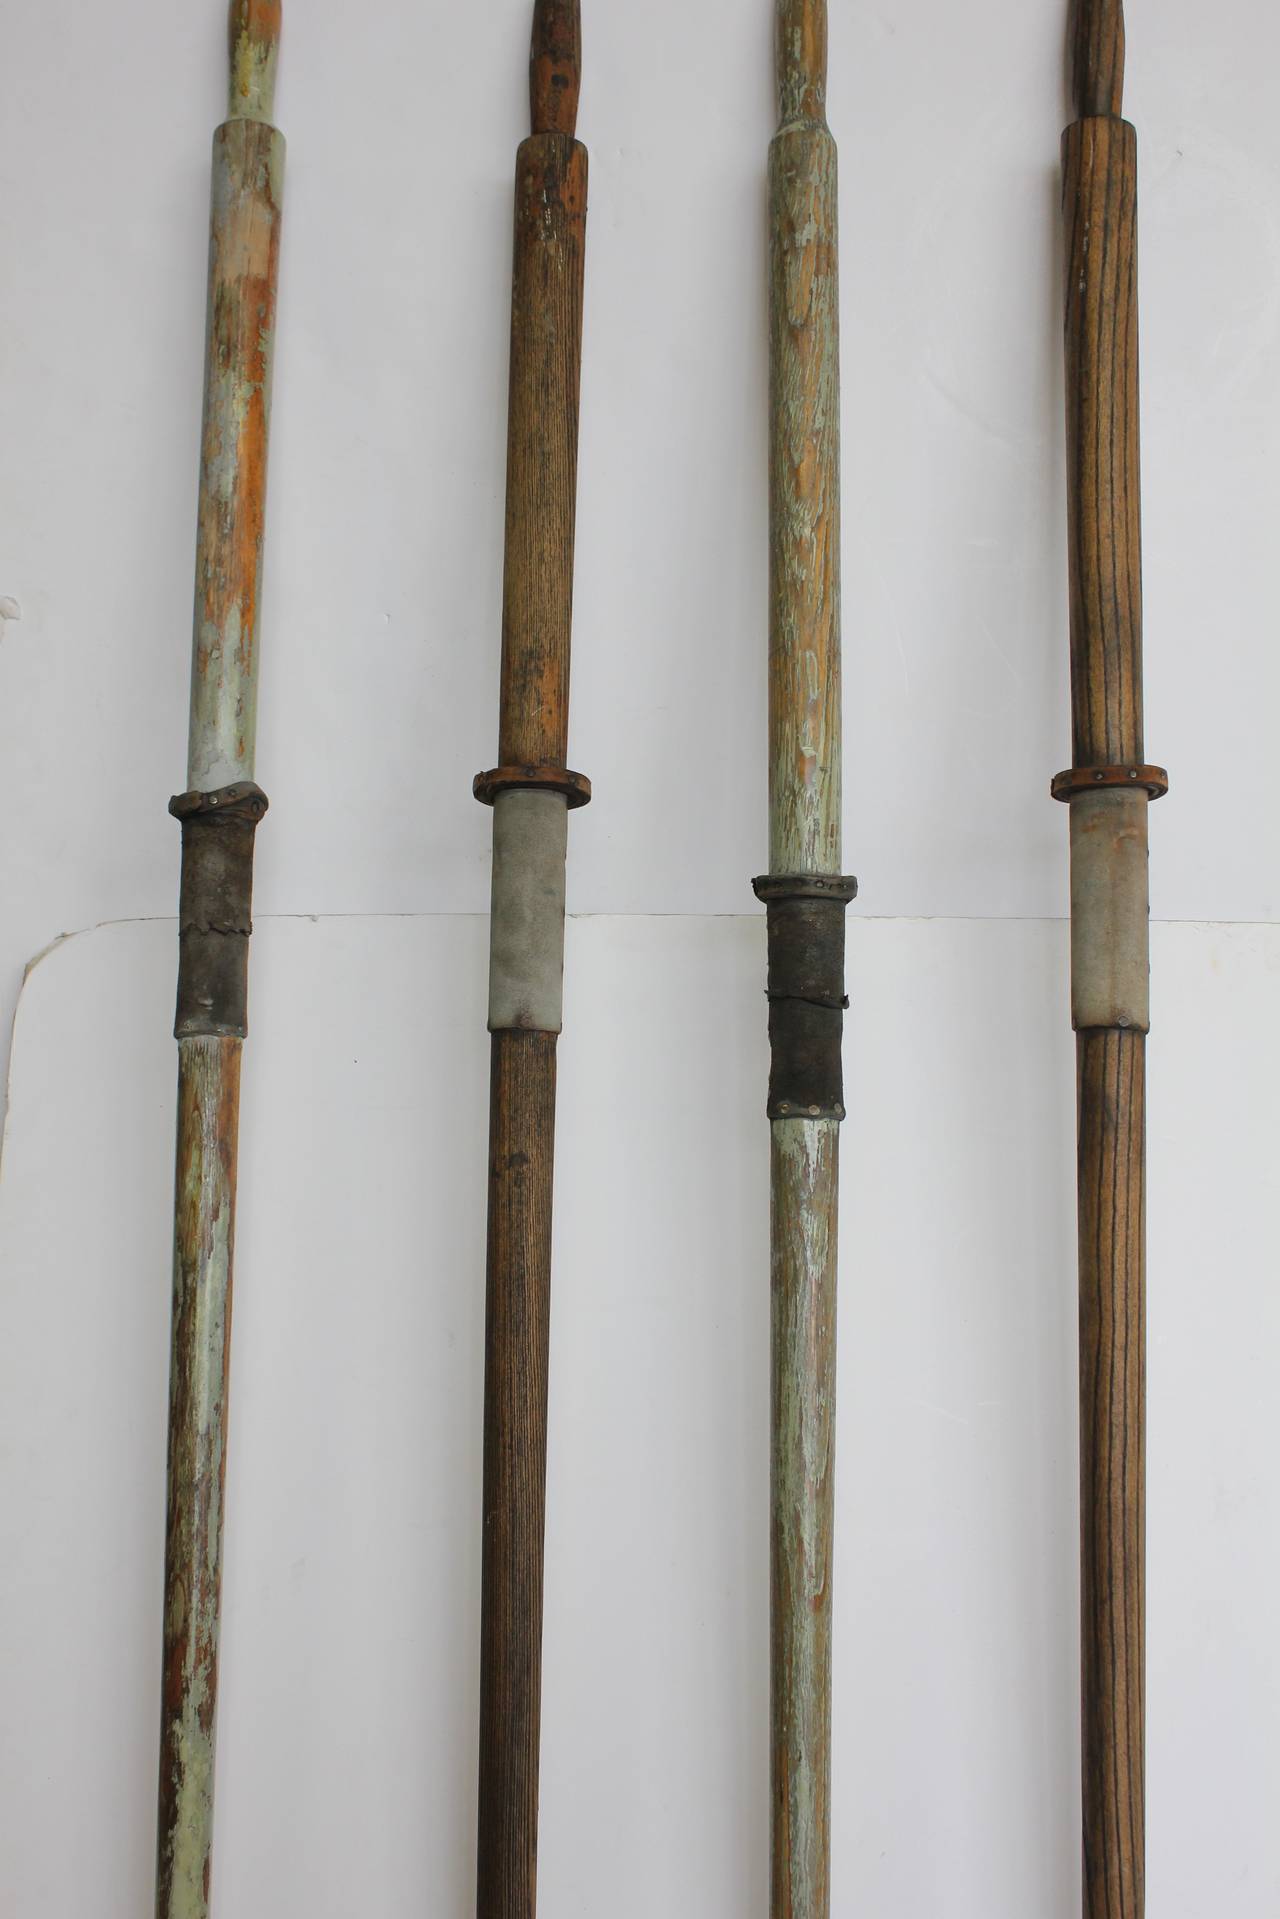 Collection of vintage wood oars with leather holders.